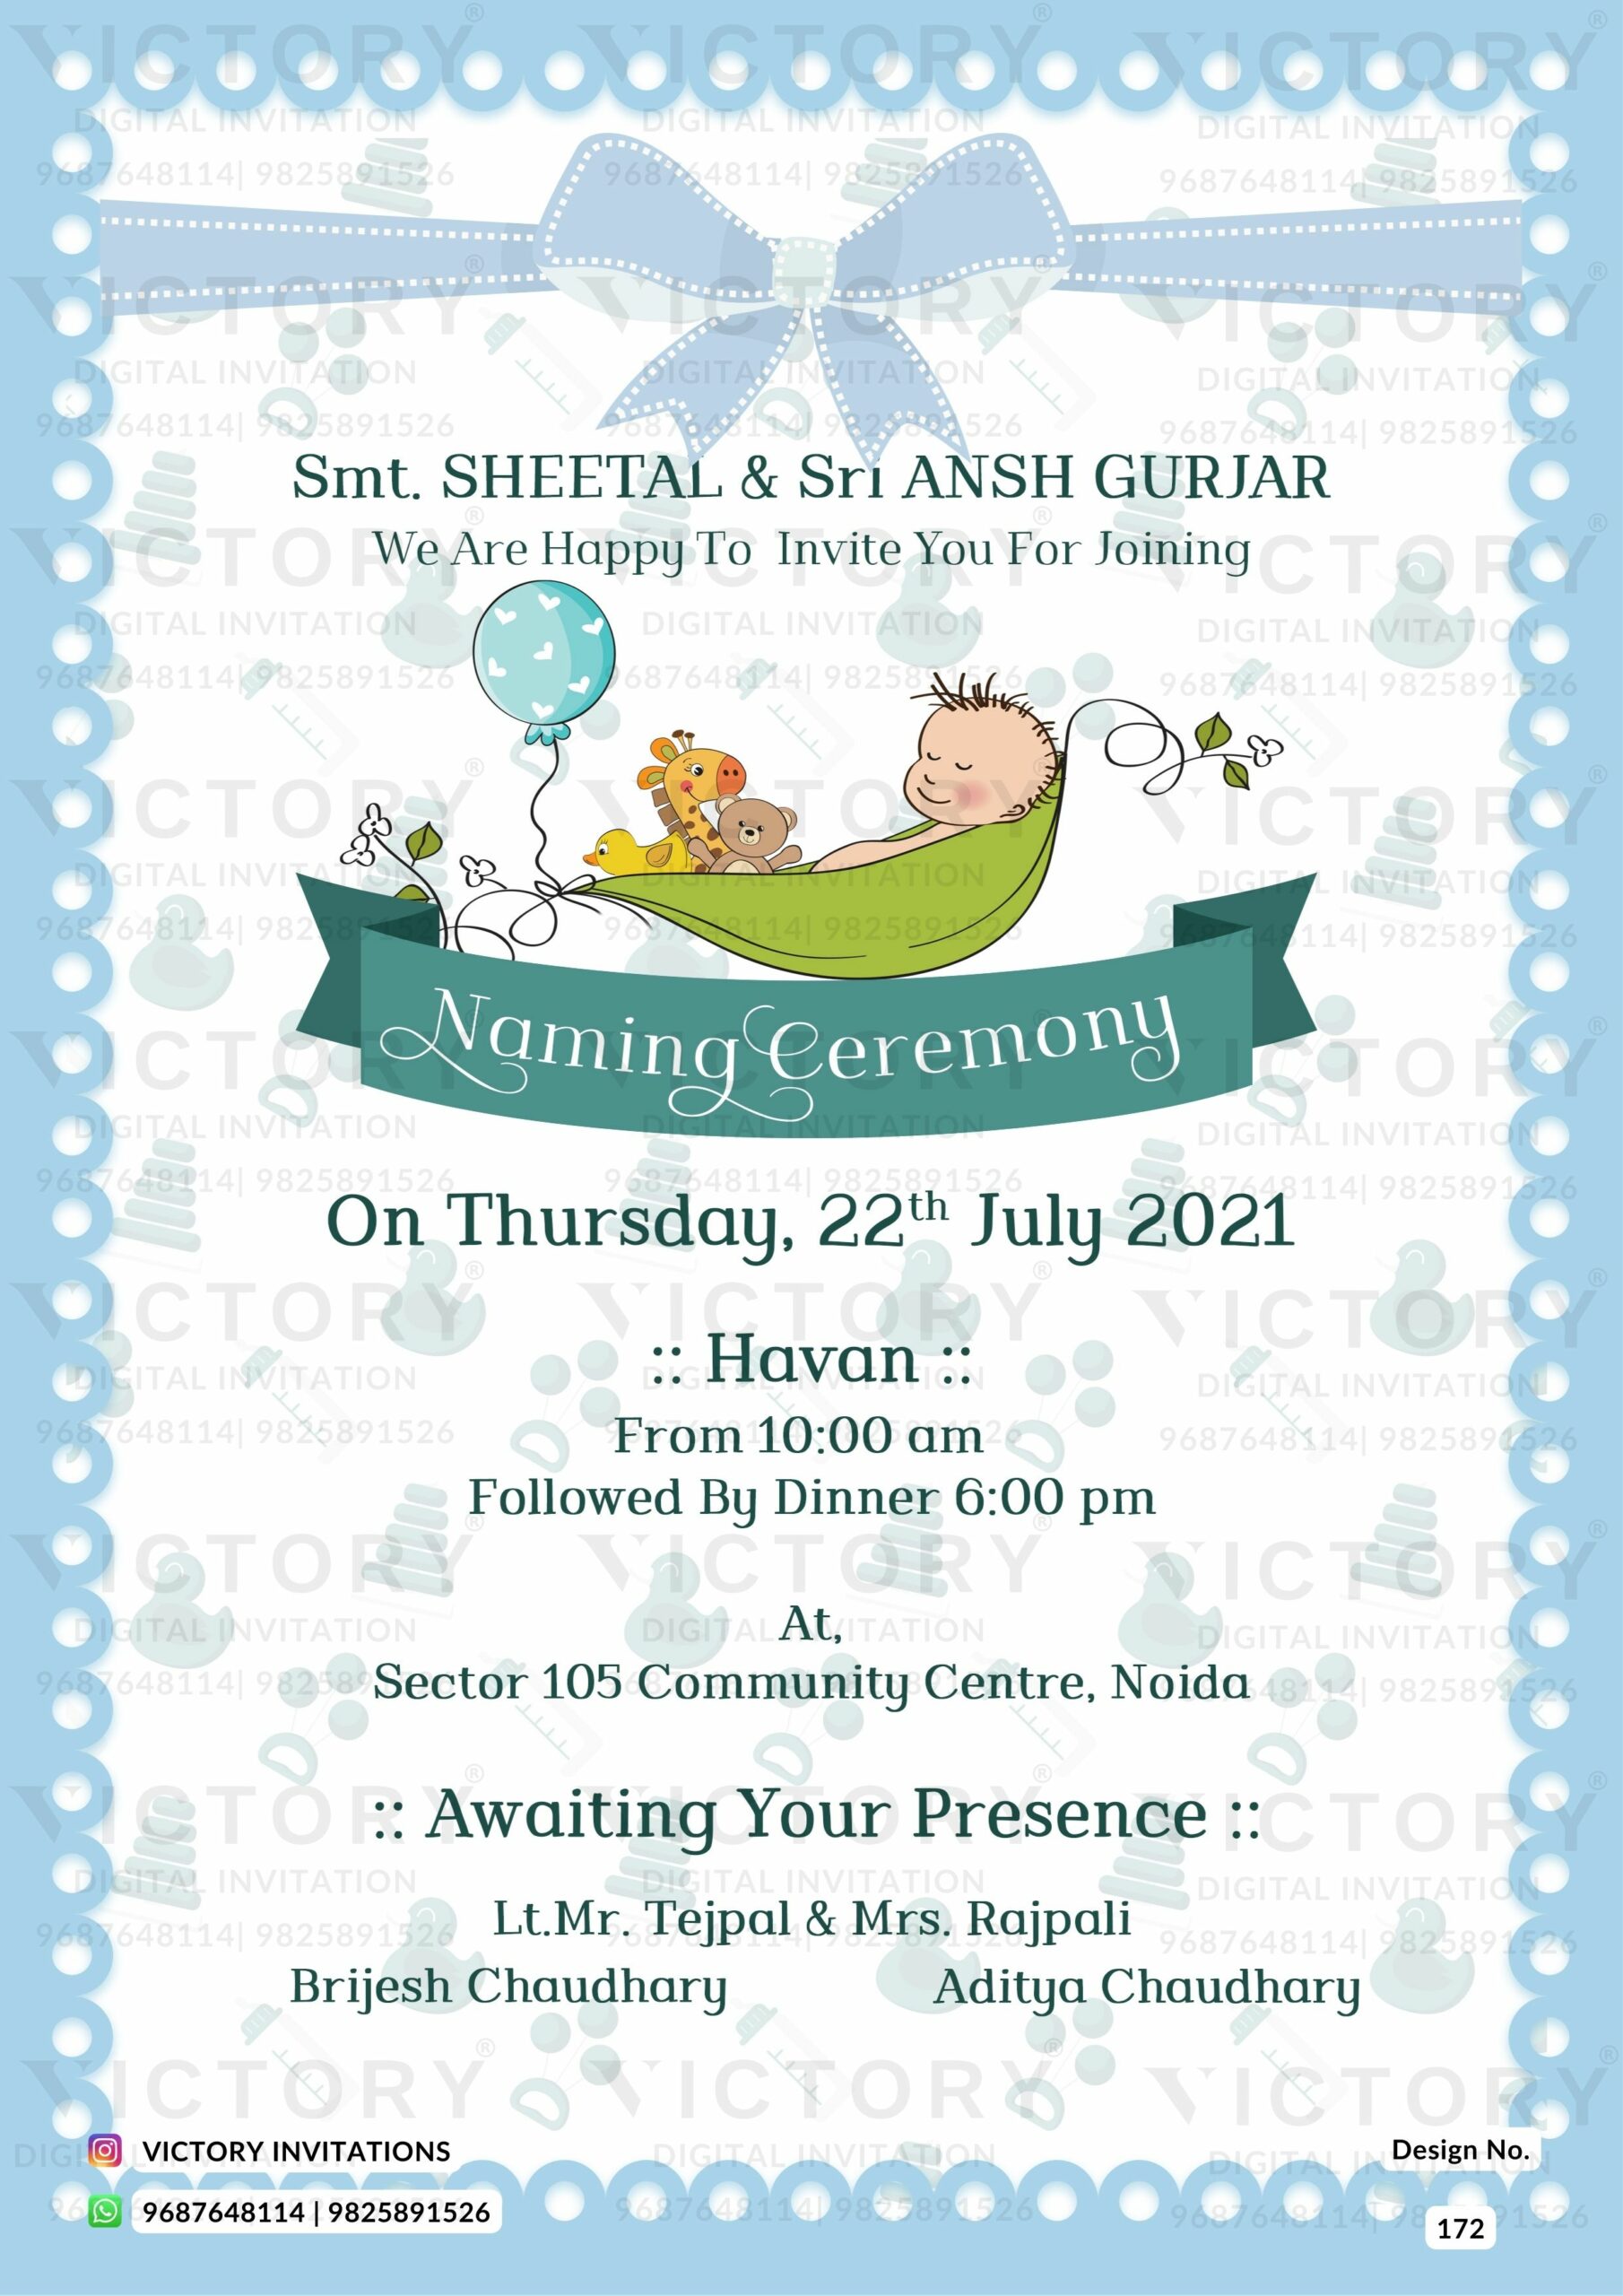 New Blue Baby Boy Naming Ceremony Digital invitation with a Wrapped Baby  Illustration, design no. 172 